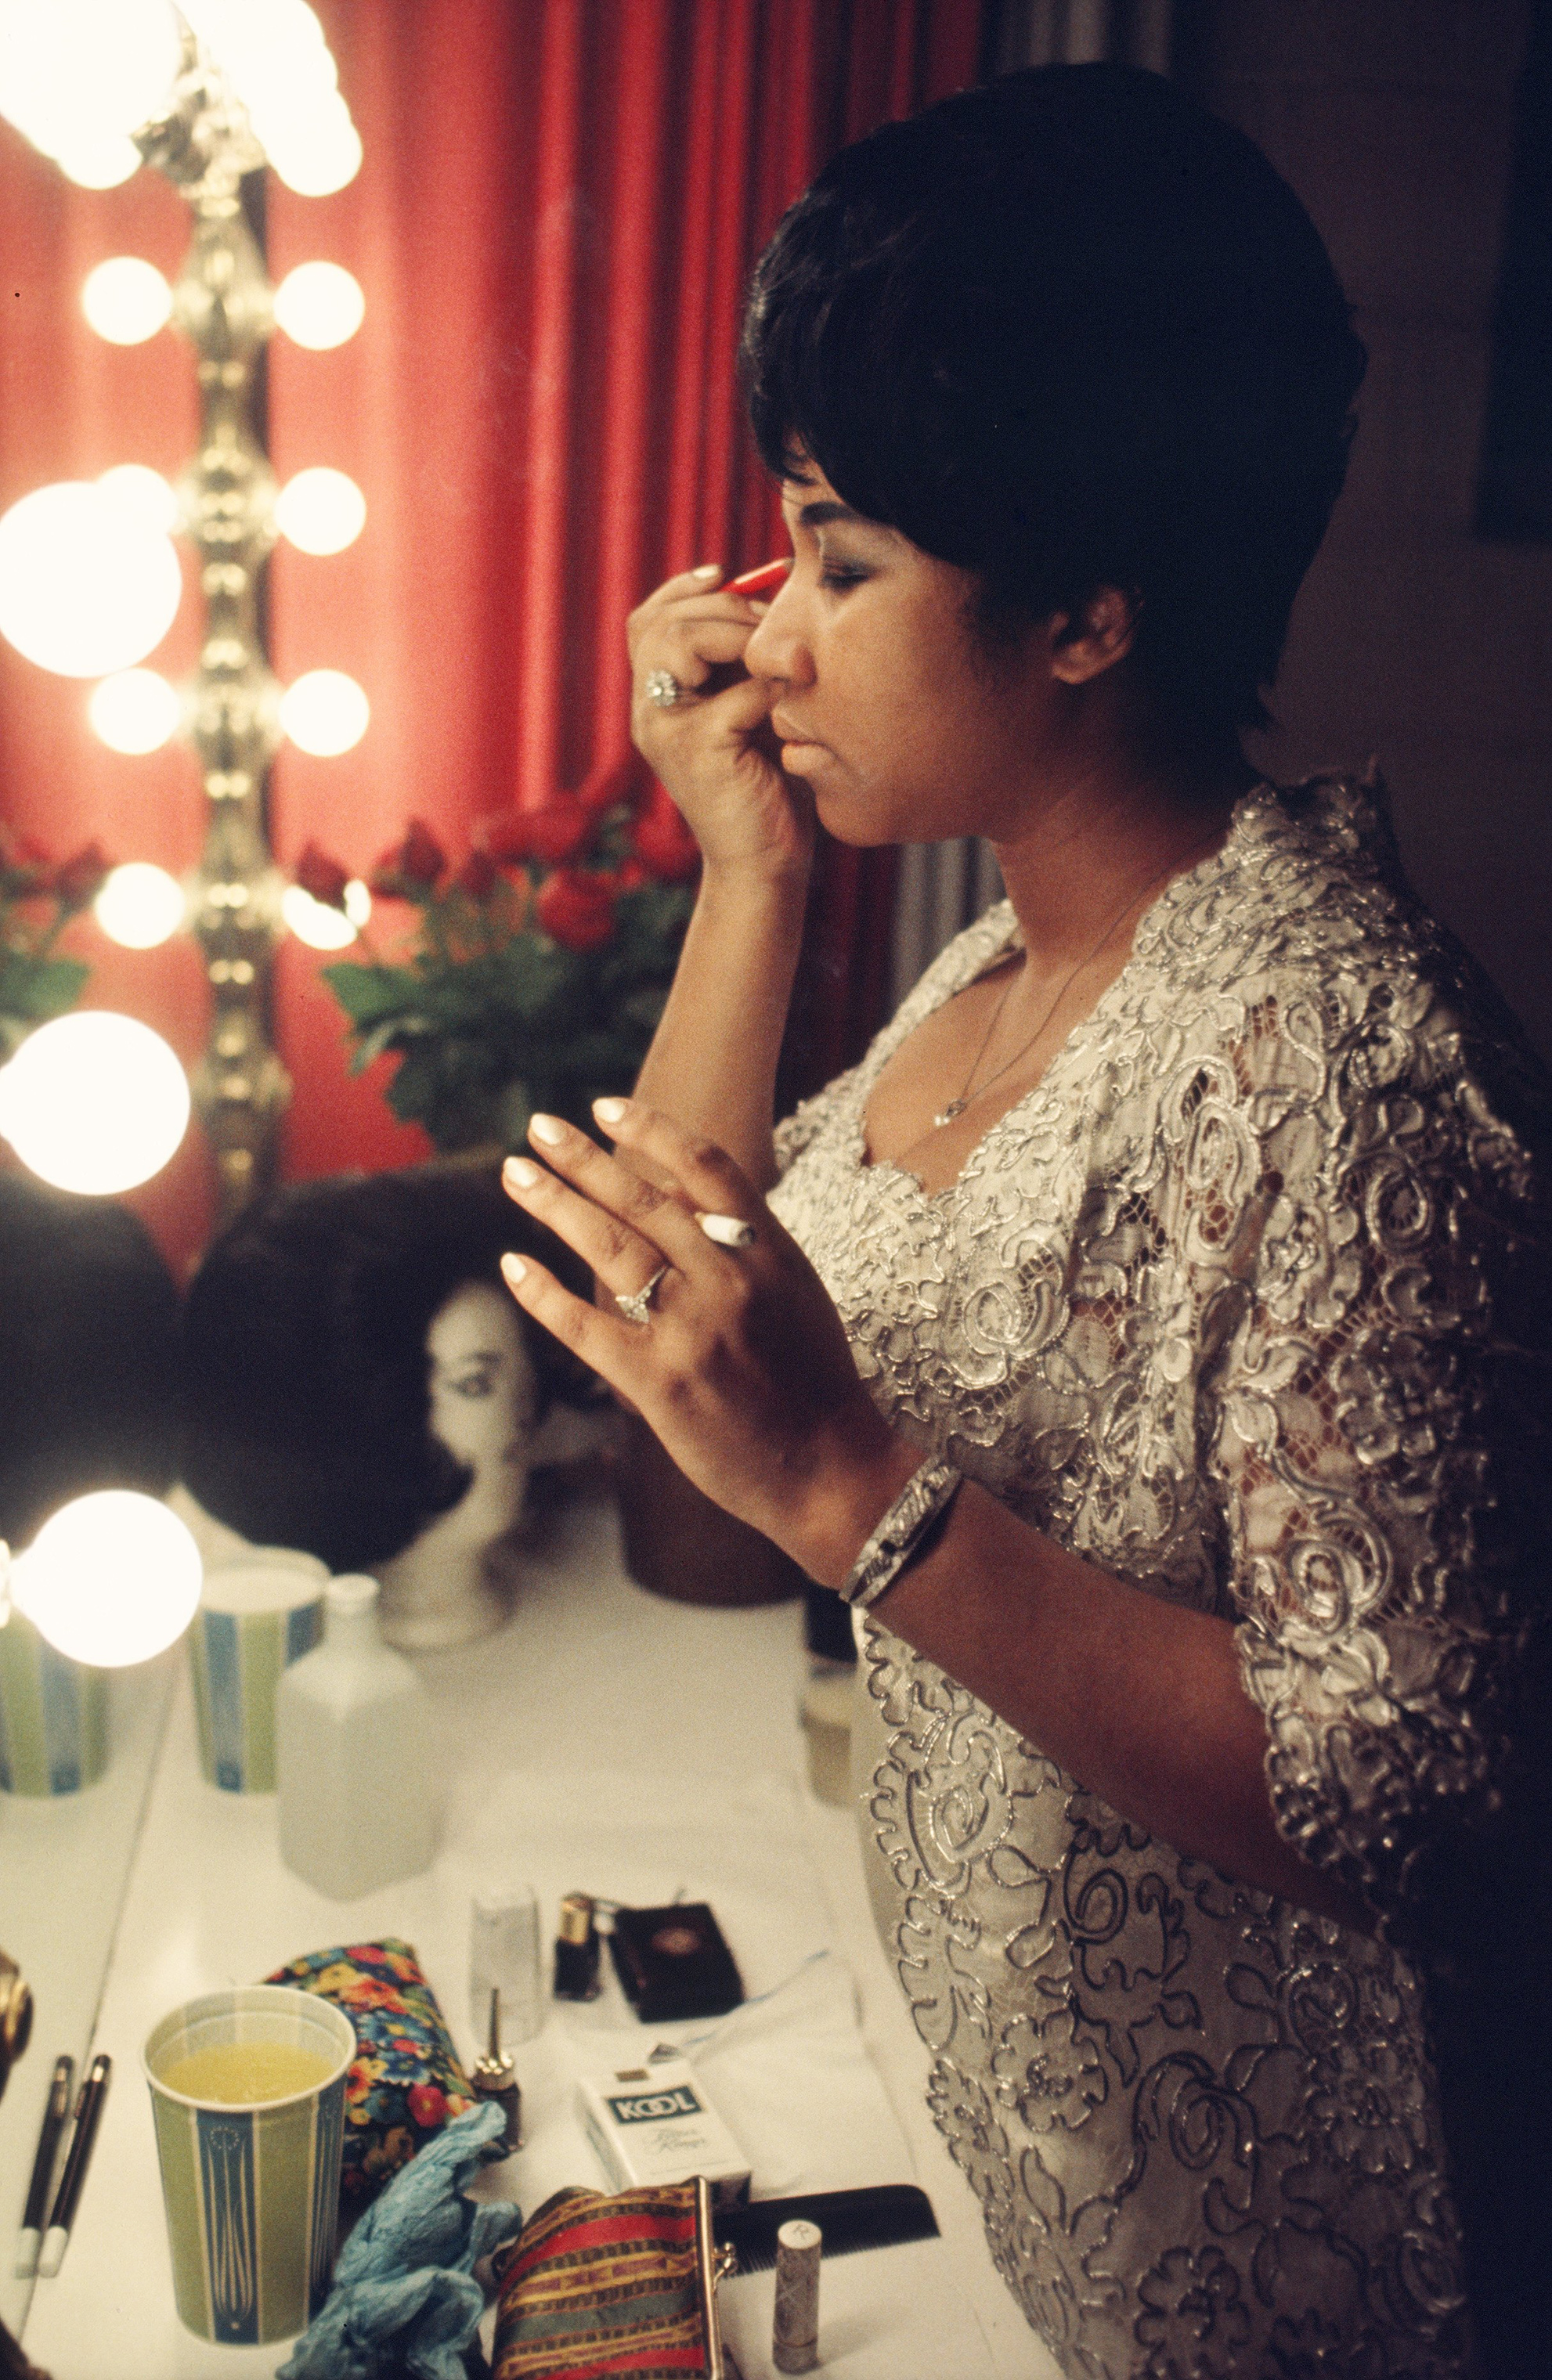 Aretha Franklin fixes her makeup backstage before a performance at Symphony Hall in 1969, Newark. (Walter Iooss—Getty Images)